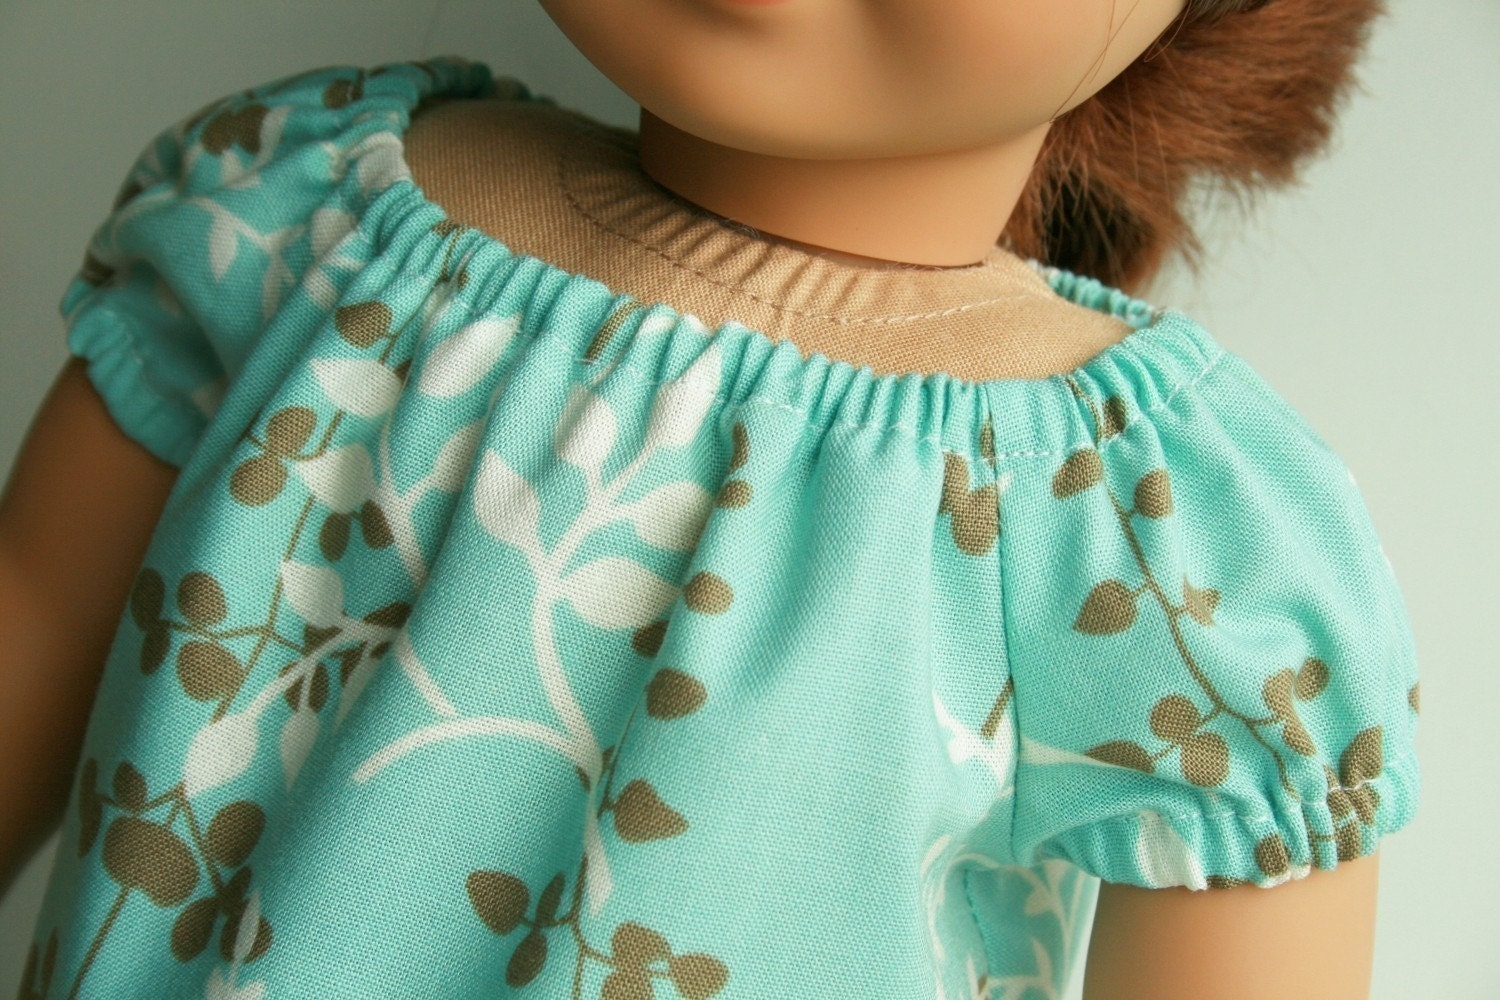 American Girl Doll Clothes - A Peasant Top in Whimsical Daisies, OOAK